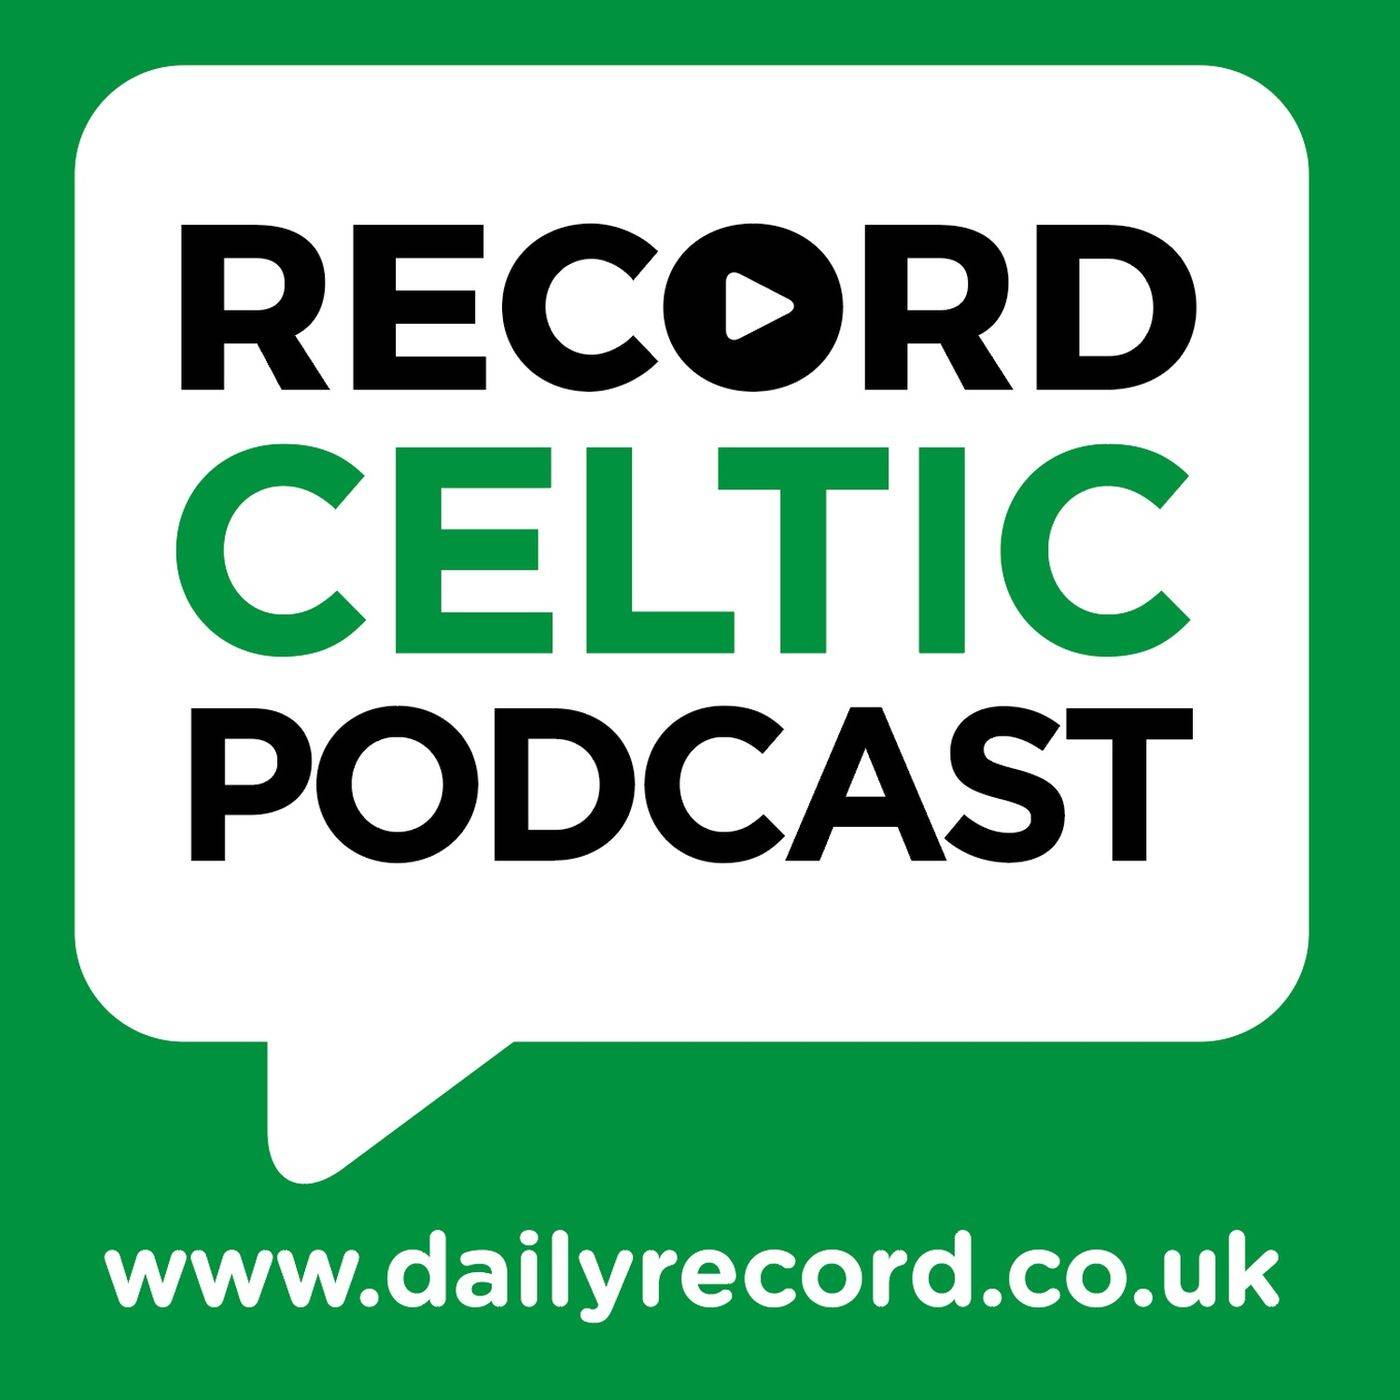 Lazio predictions | Celtic should start Matt O’Riley bidding at £30M | Gers’ woes shows importance of spending big on proven boss